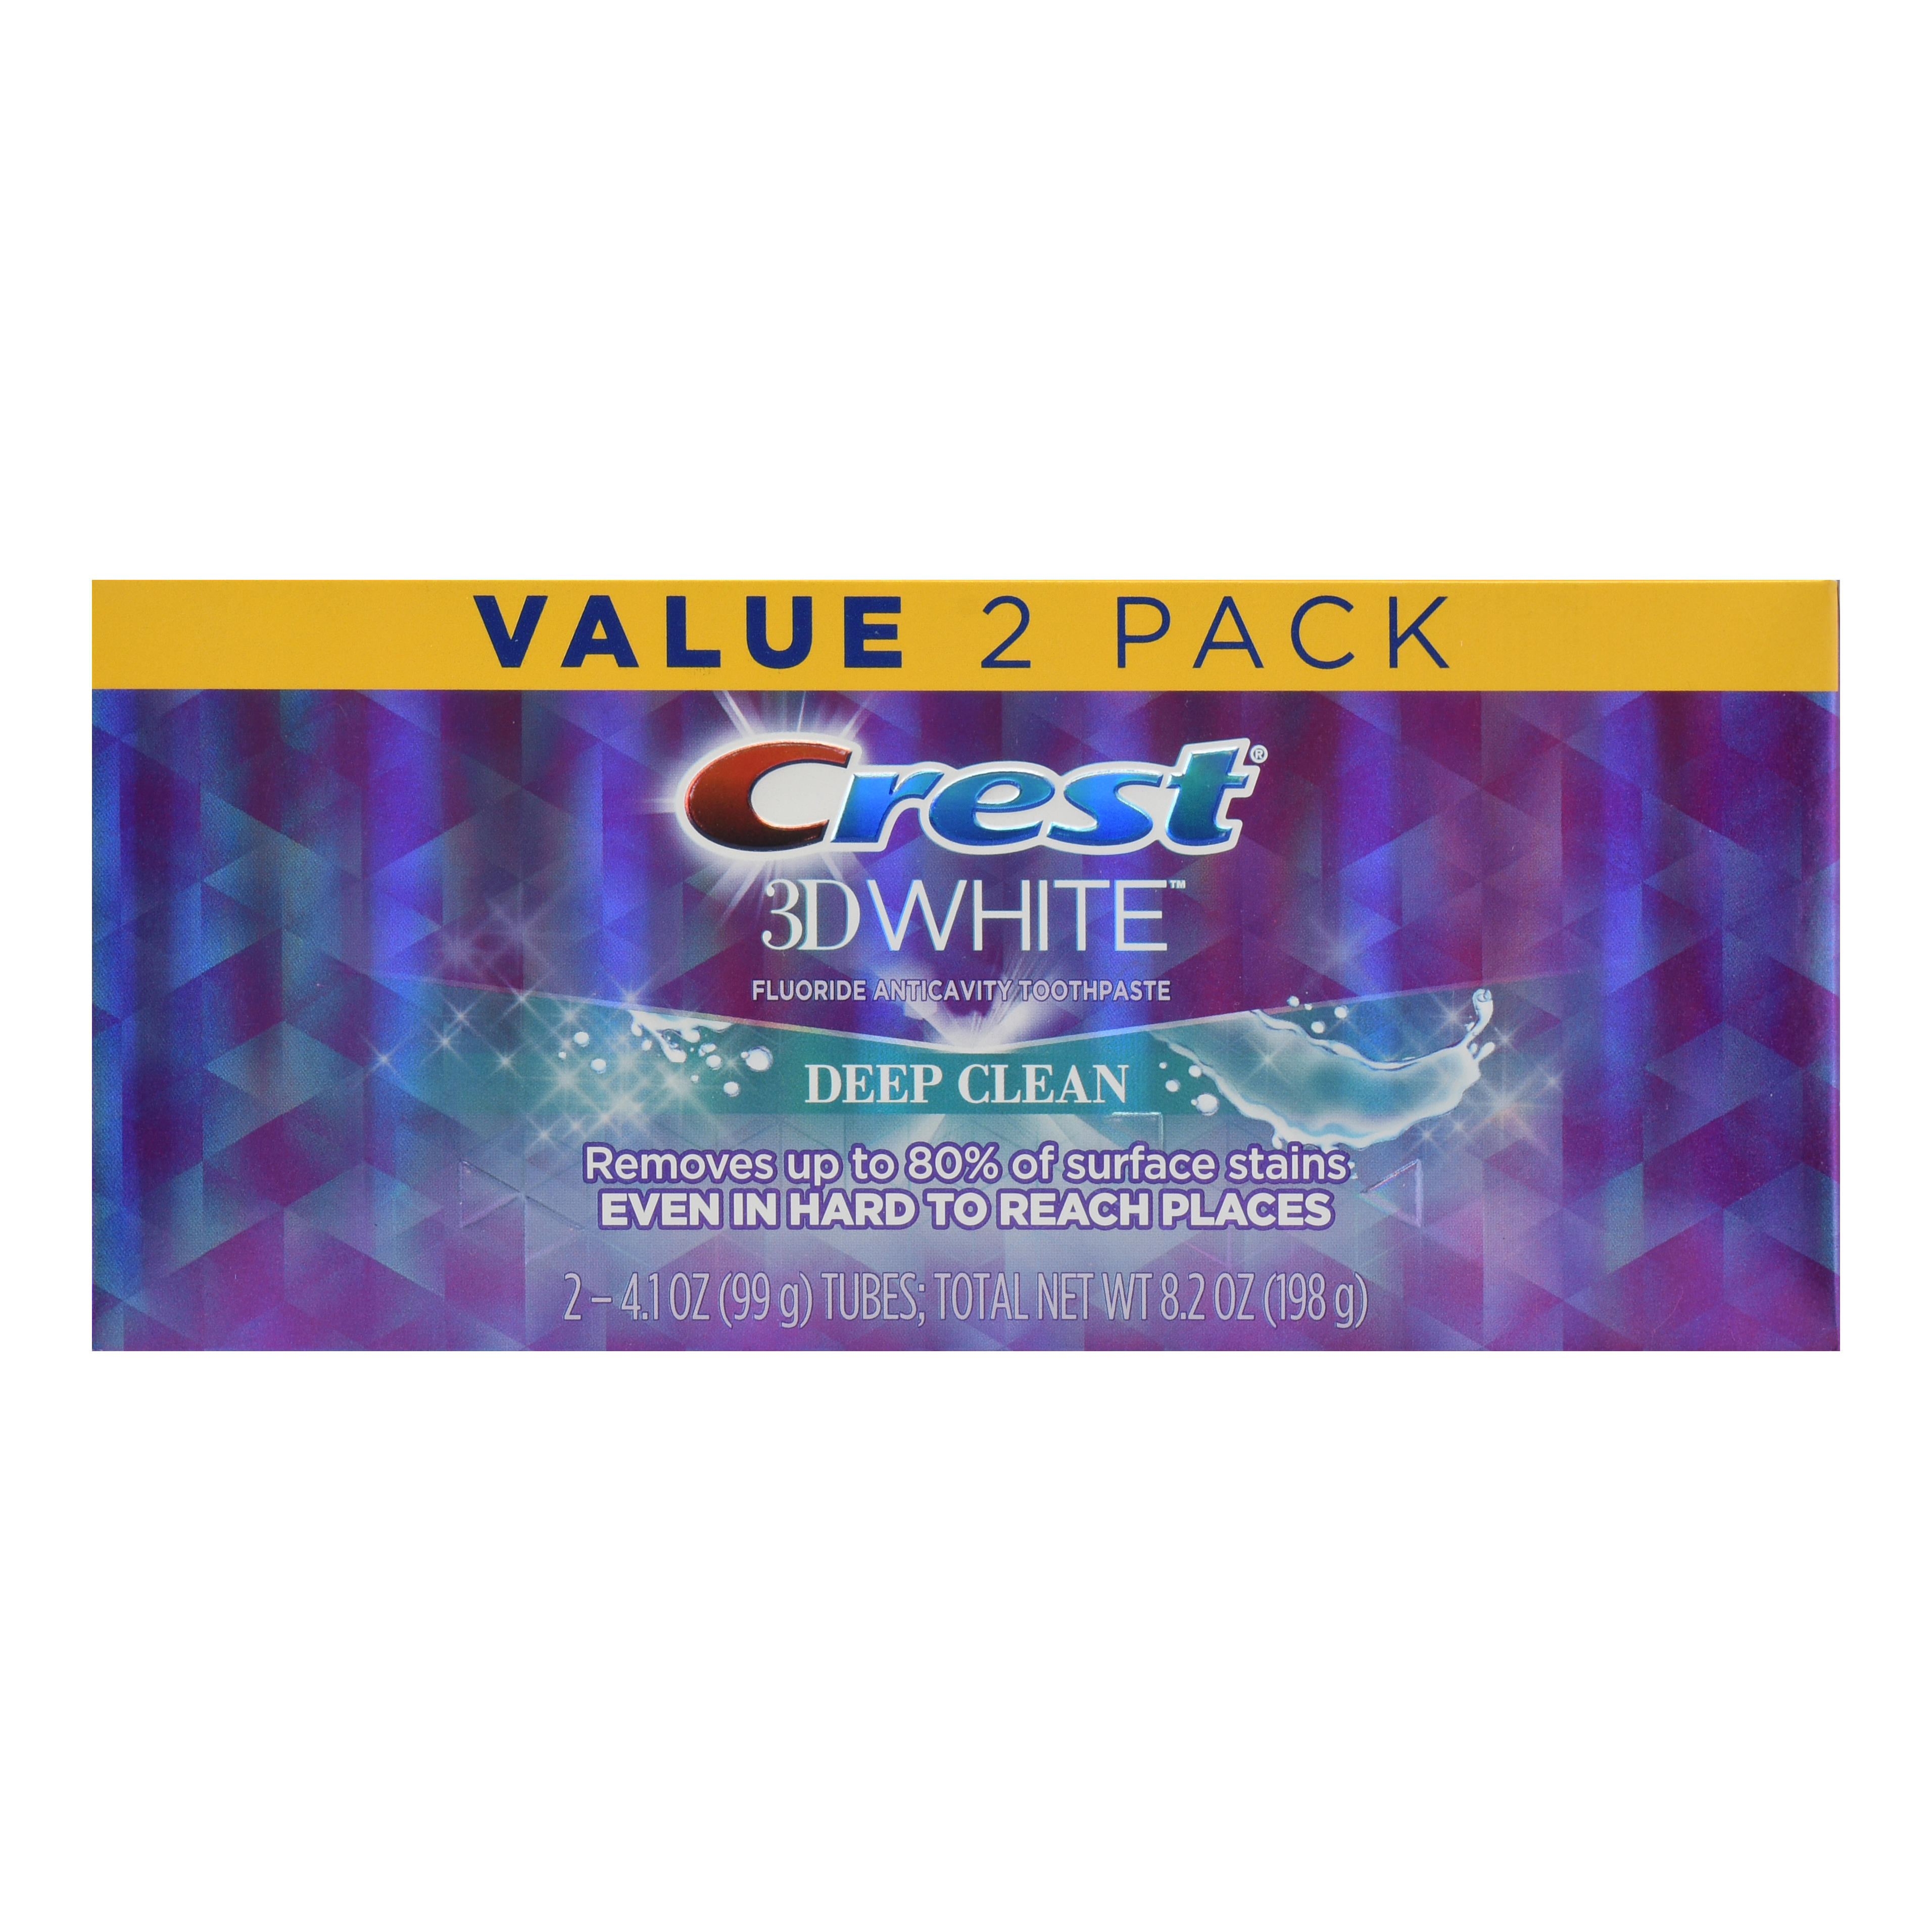 Crest 3D White, Whitening Toothpaste Deep Clean, 4.1 oz, Pack of 2 - image 1 of 5